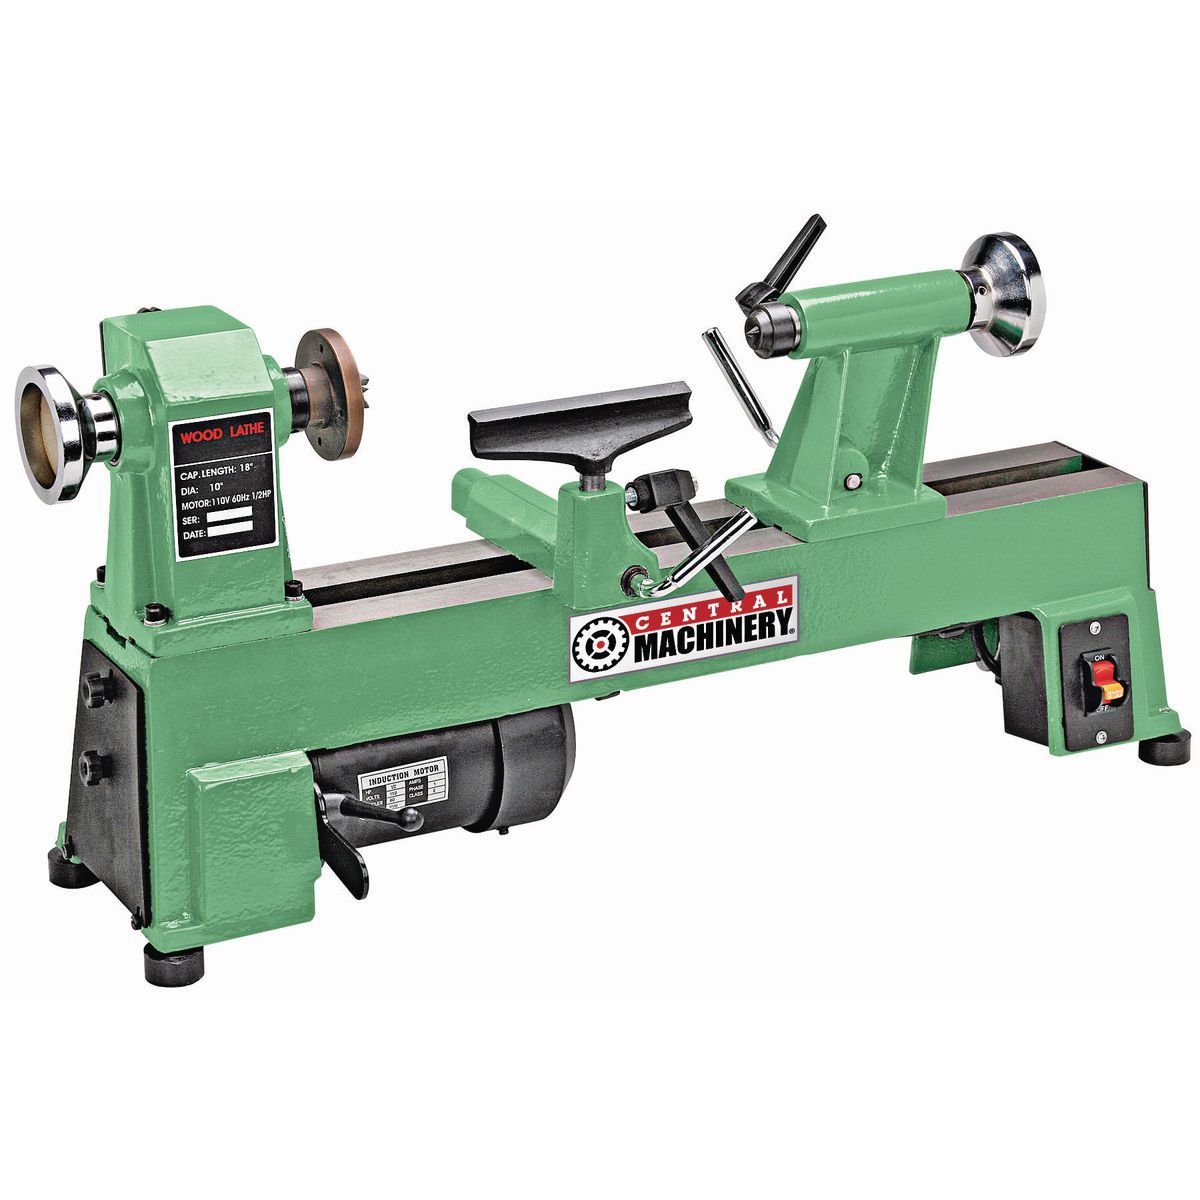 CENTRAL MACHINERY Benchtop Wood Lathe - 5 Speed